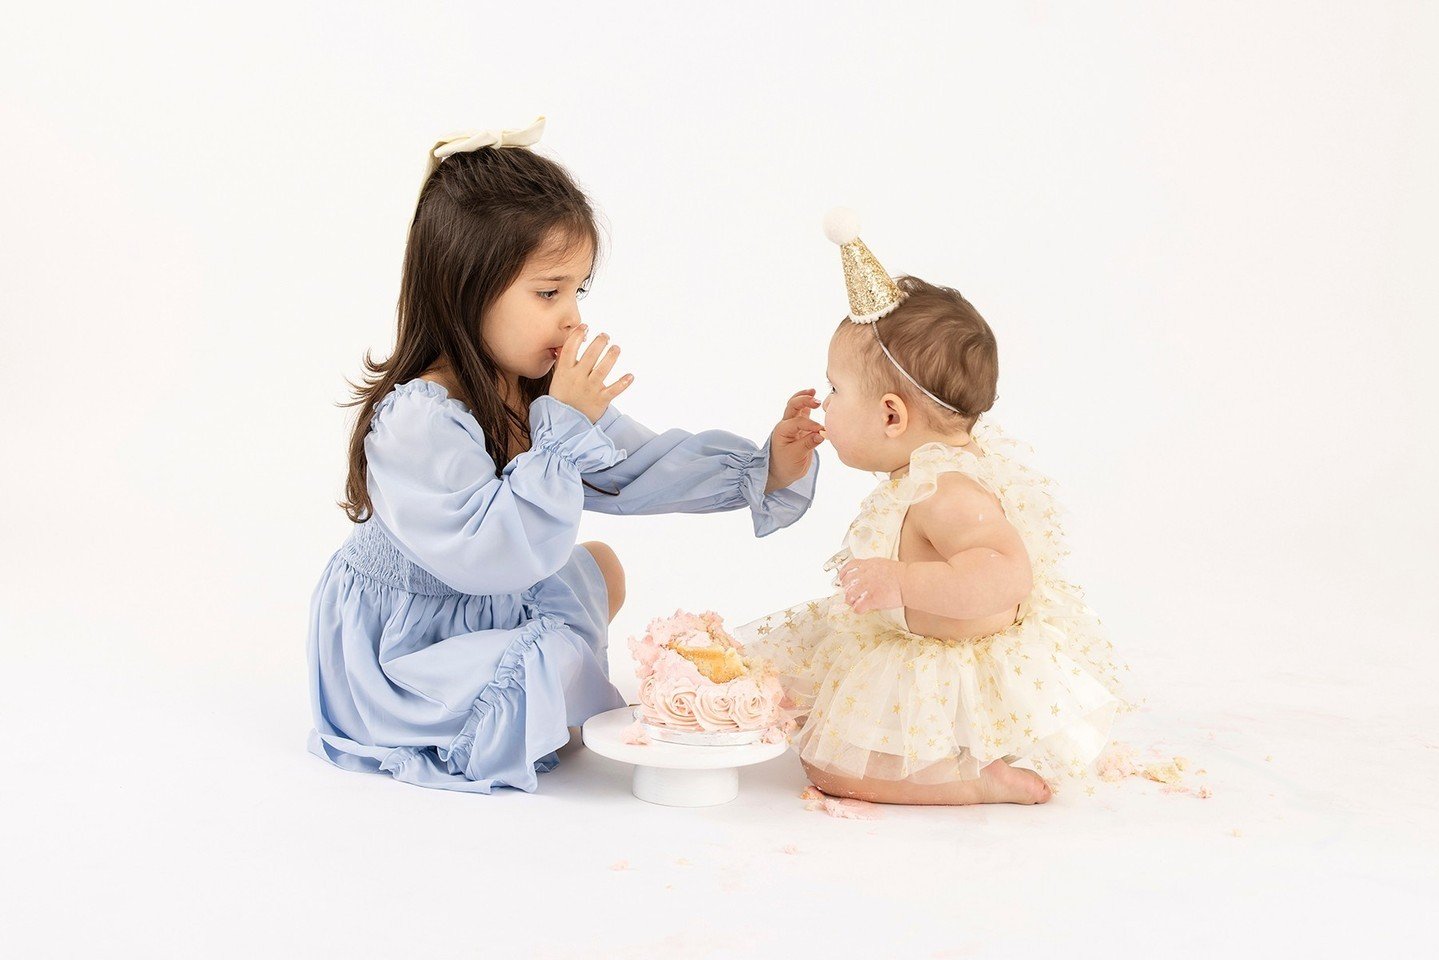 Big sister is getting in on some cake action! Sharing is caring. 💕 Treasured moments between sisters. 
.⁠
.⁠
.⁠
#FamilyPortraitSession #NewbornPhotographers #NewbornPhotographyProps #NewbornPhotoshoot #NewbornInspiration #PhotographyBackdrops #TheEv